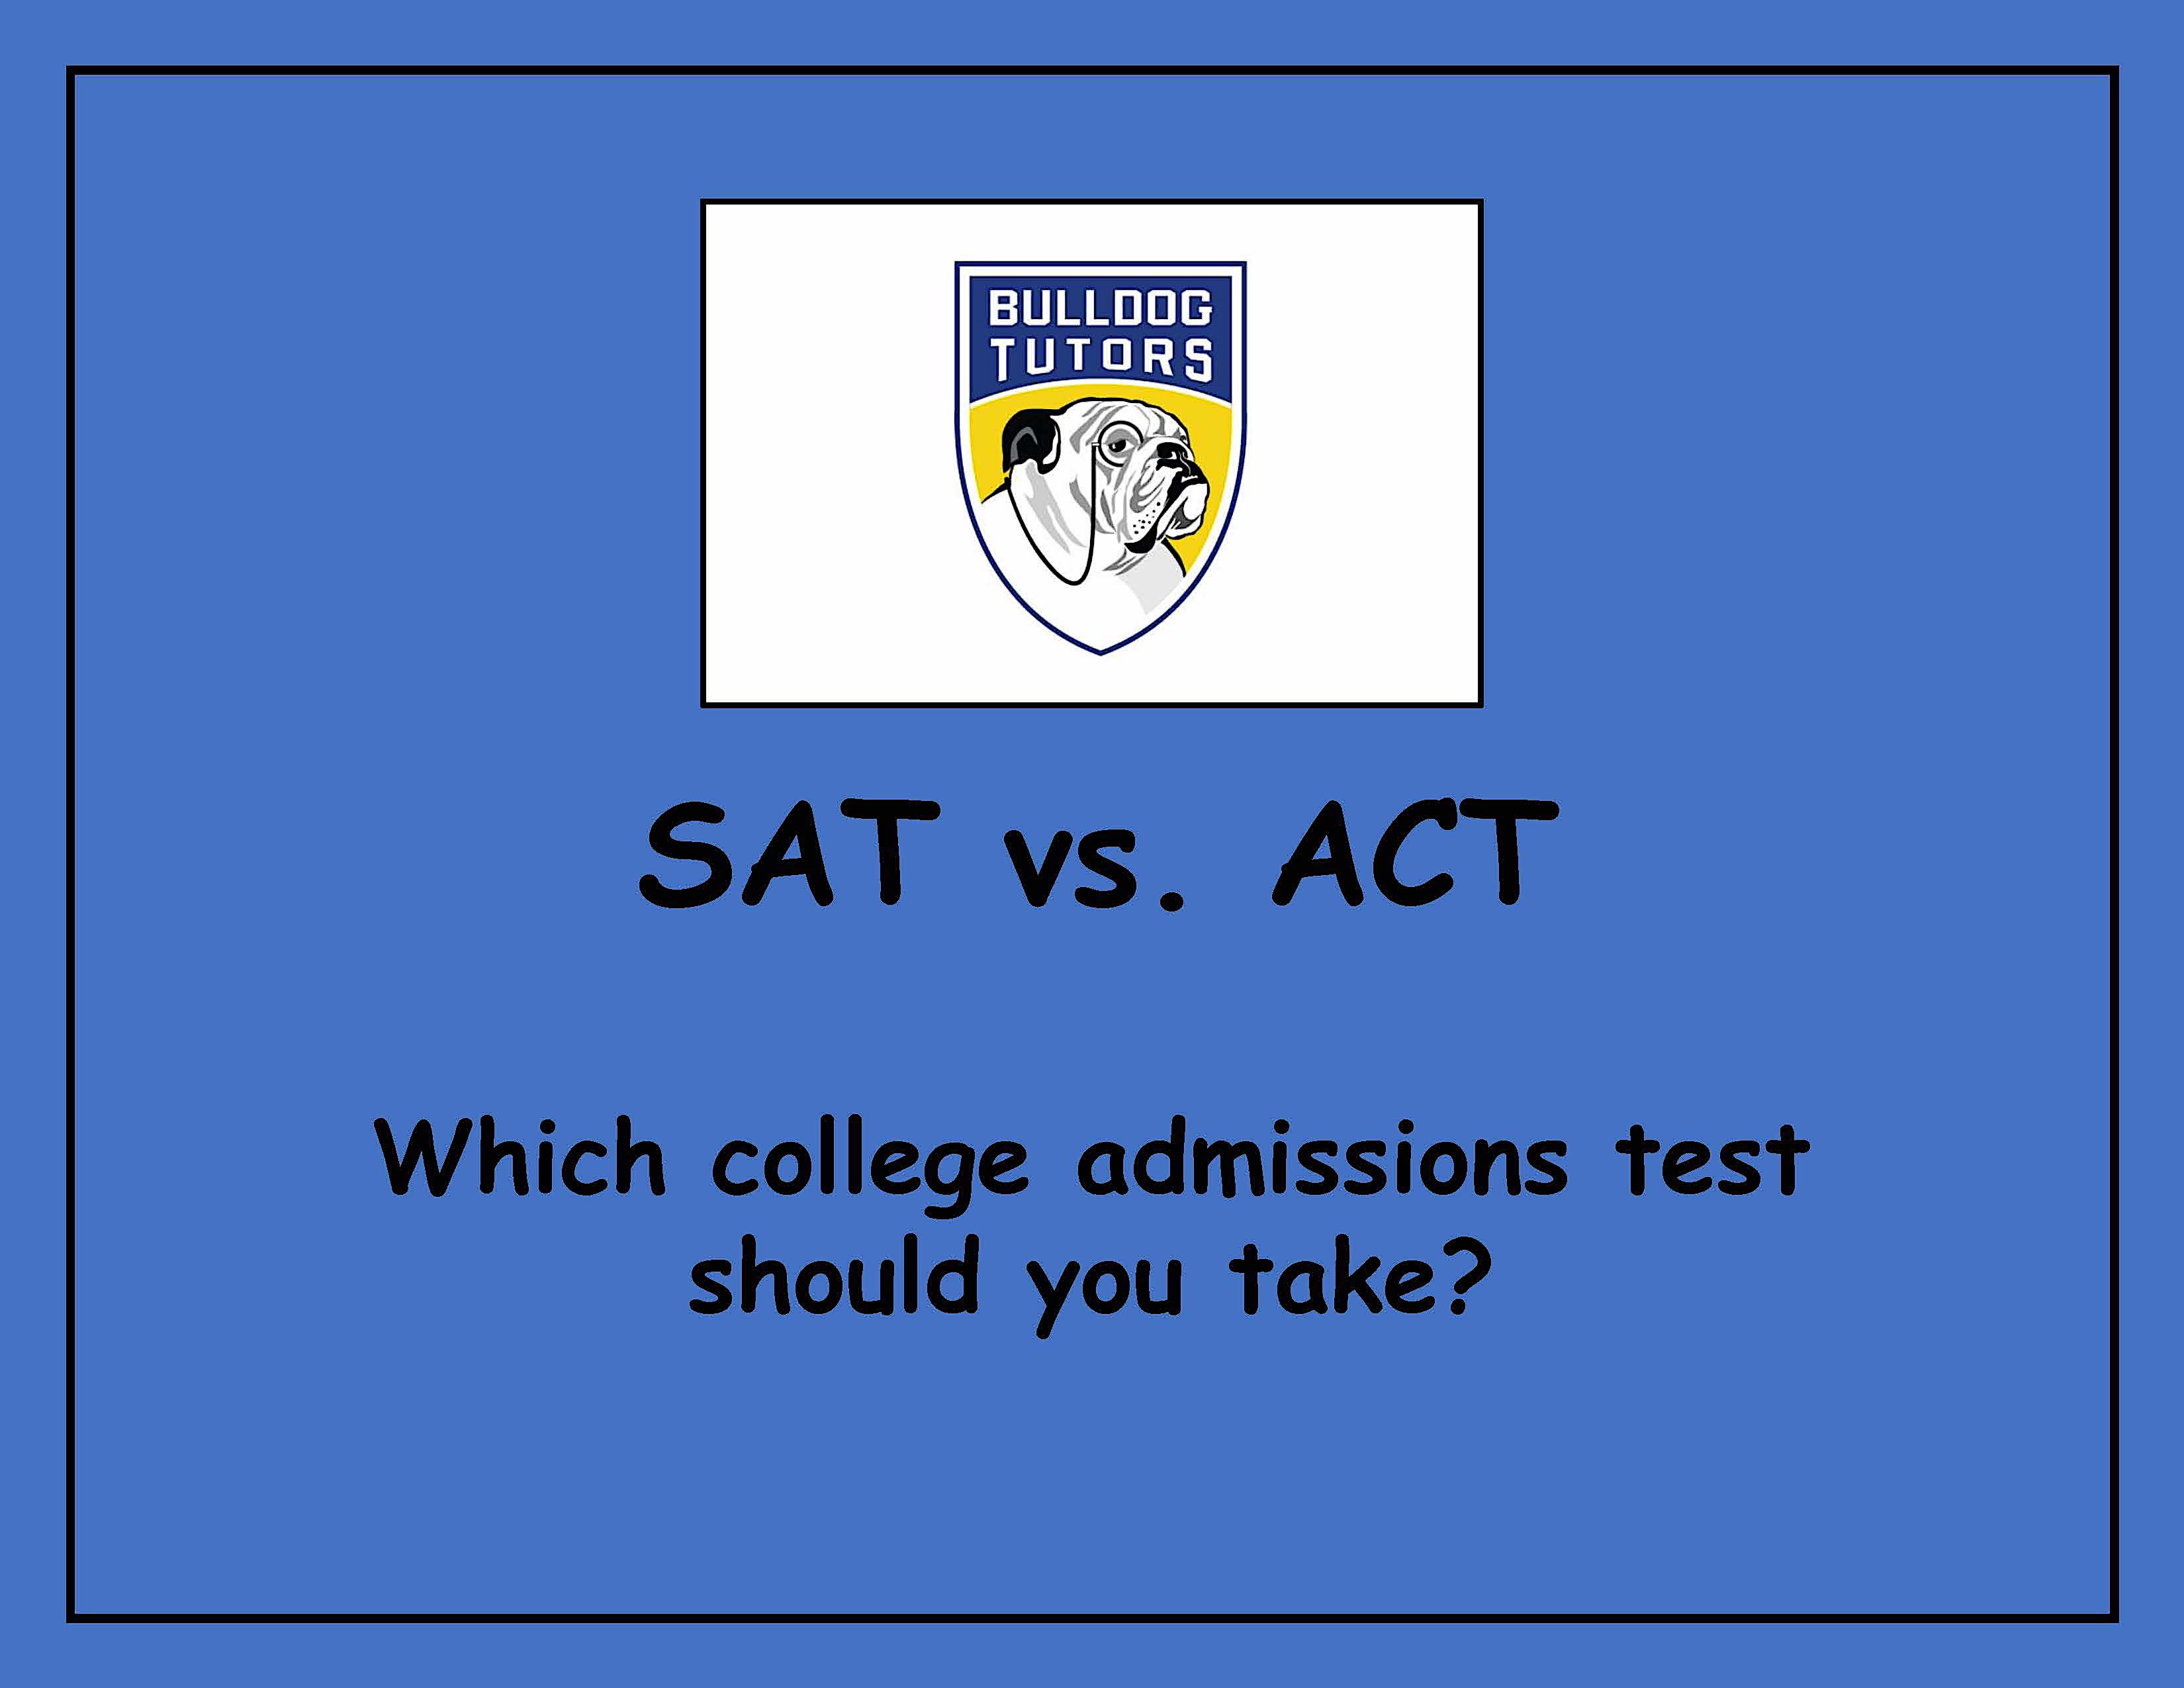 SAT vs. ACT: Which College Admissions Test Should You Take?